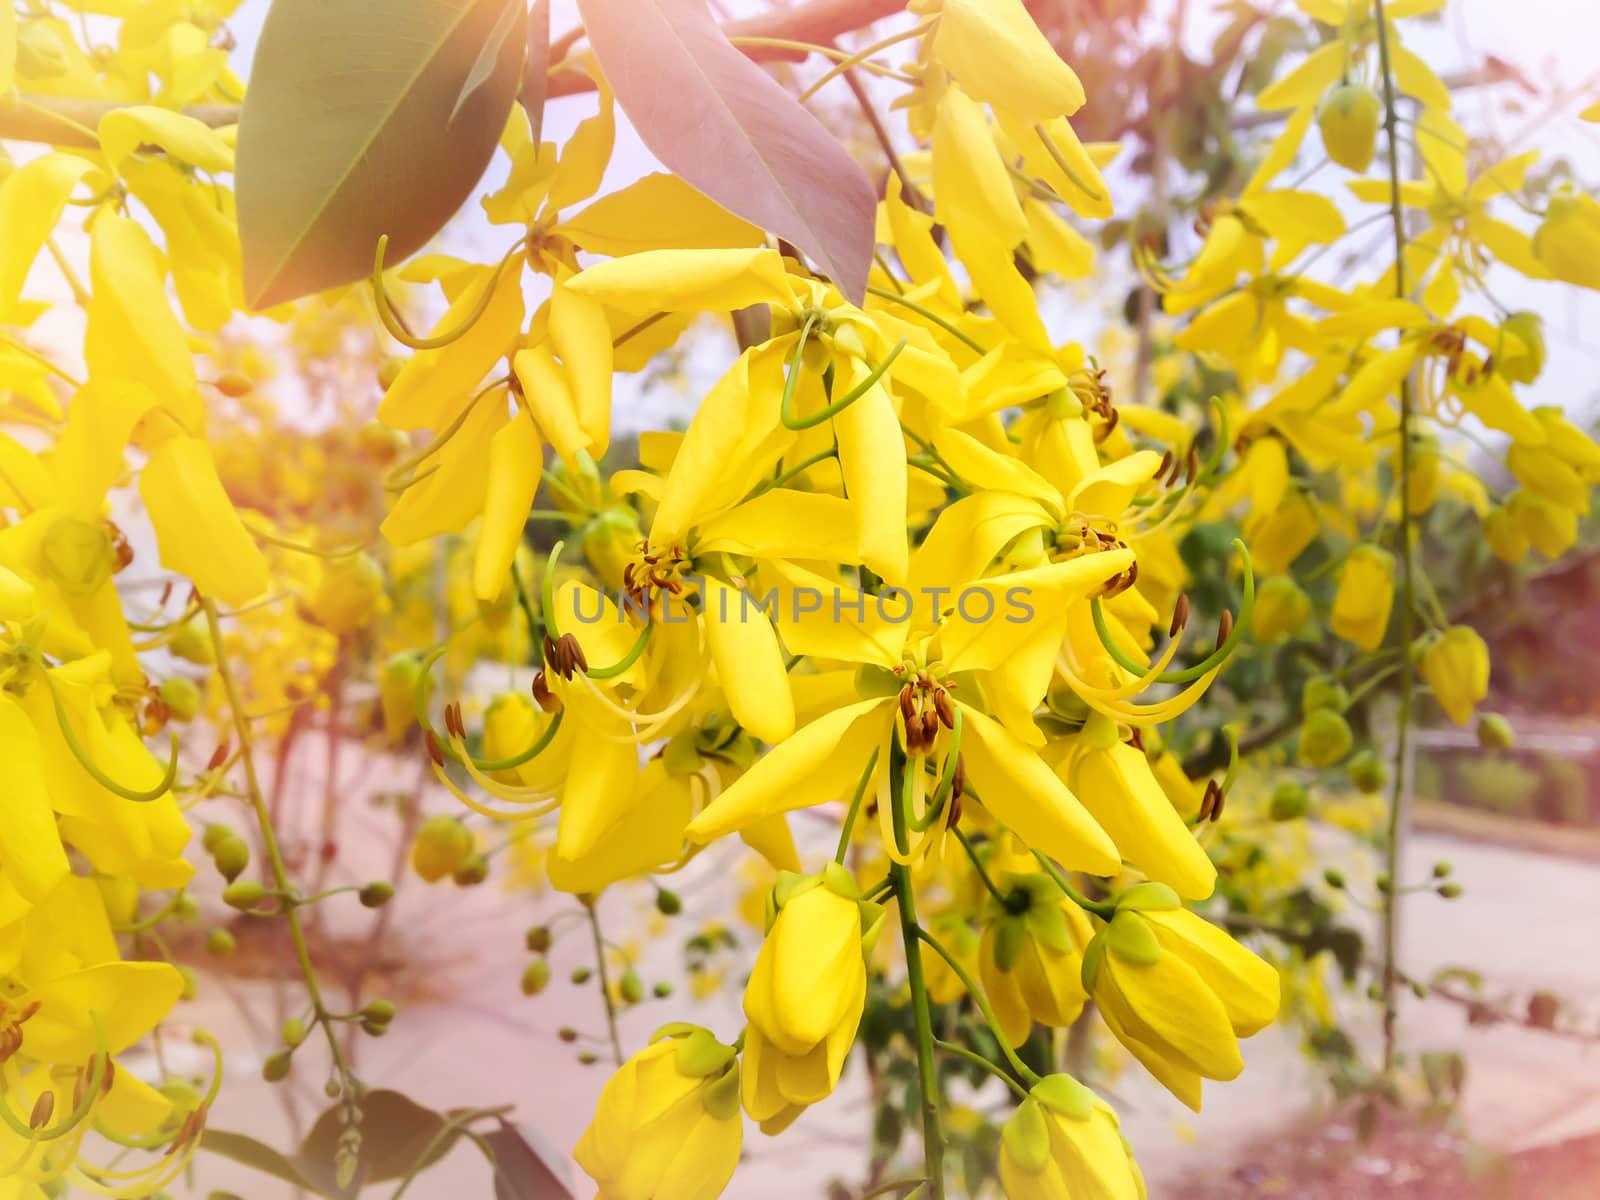 Flower Golden Shower Tree or Cassia fistula  yellow bunch in nature